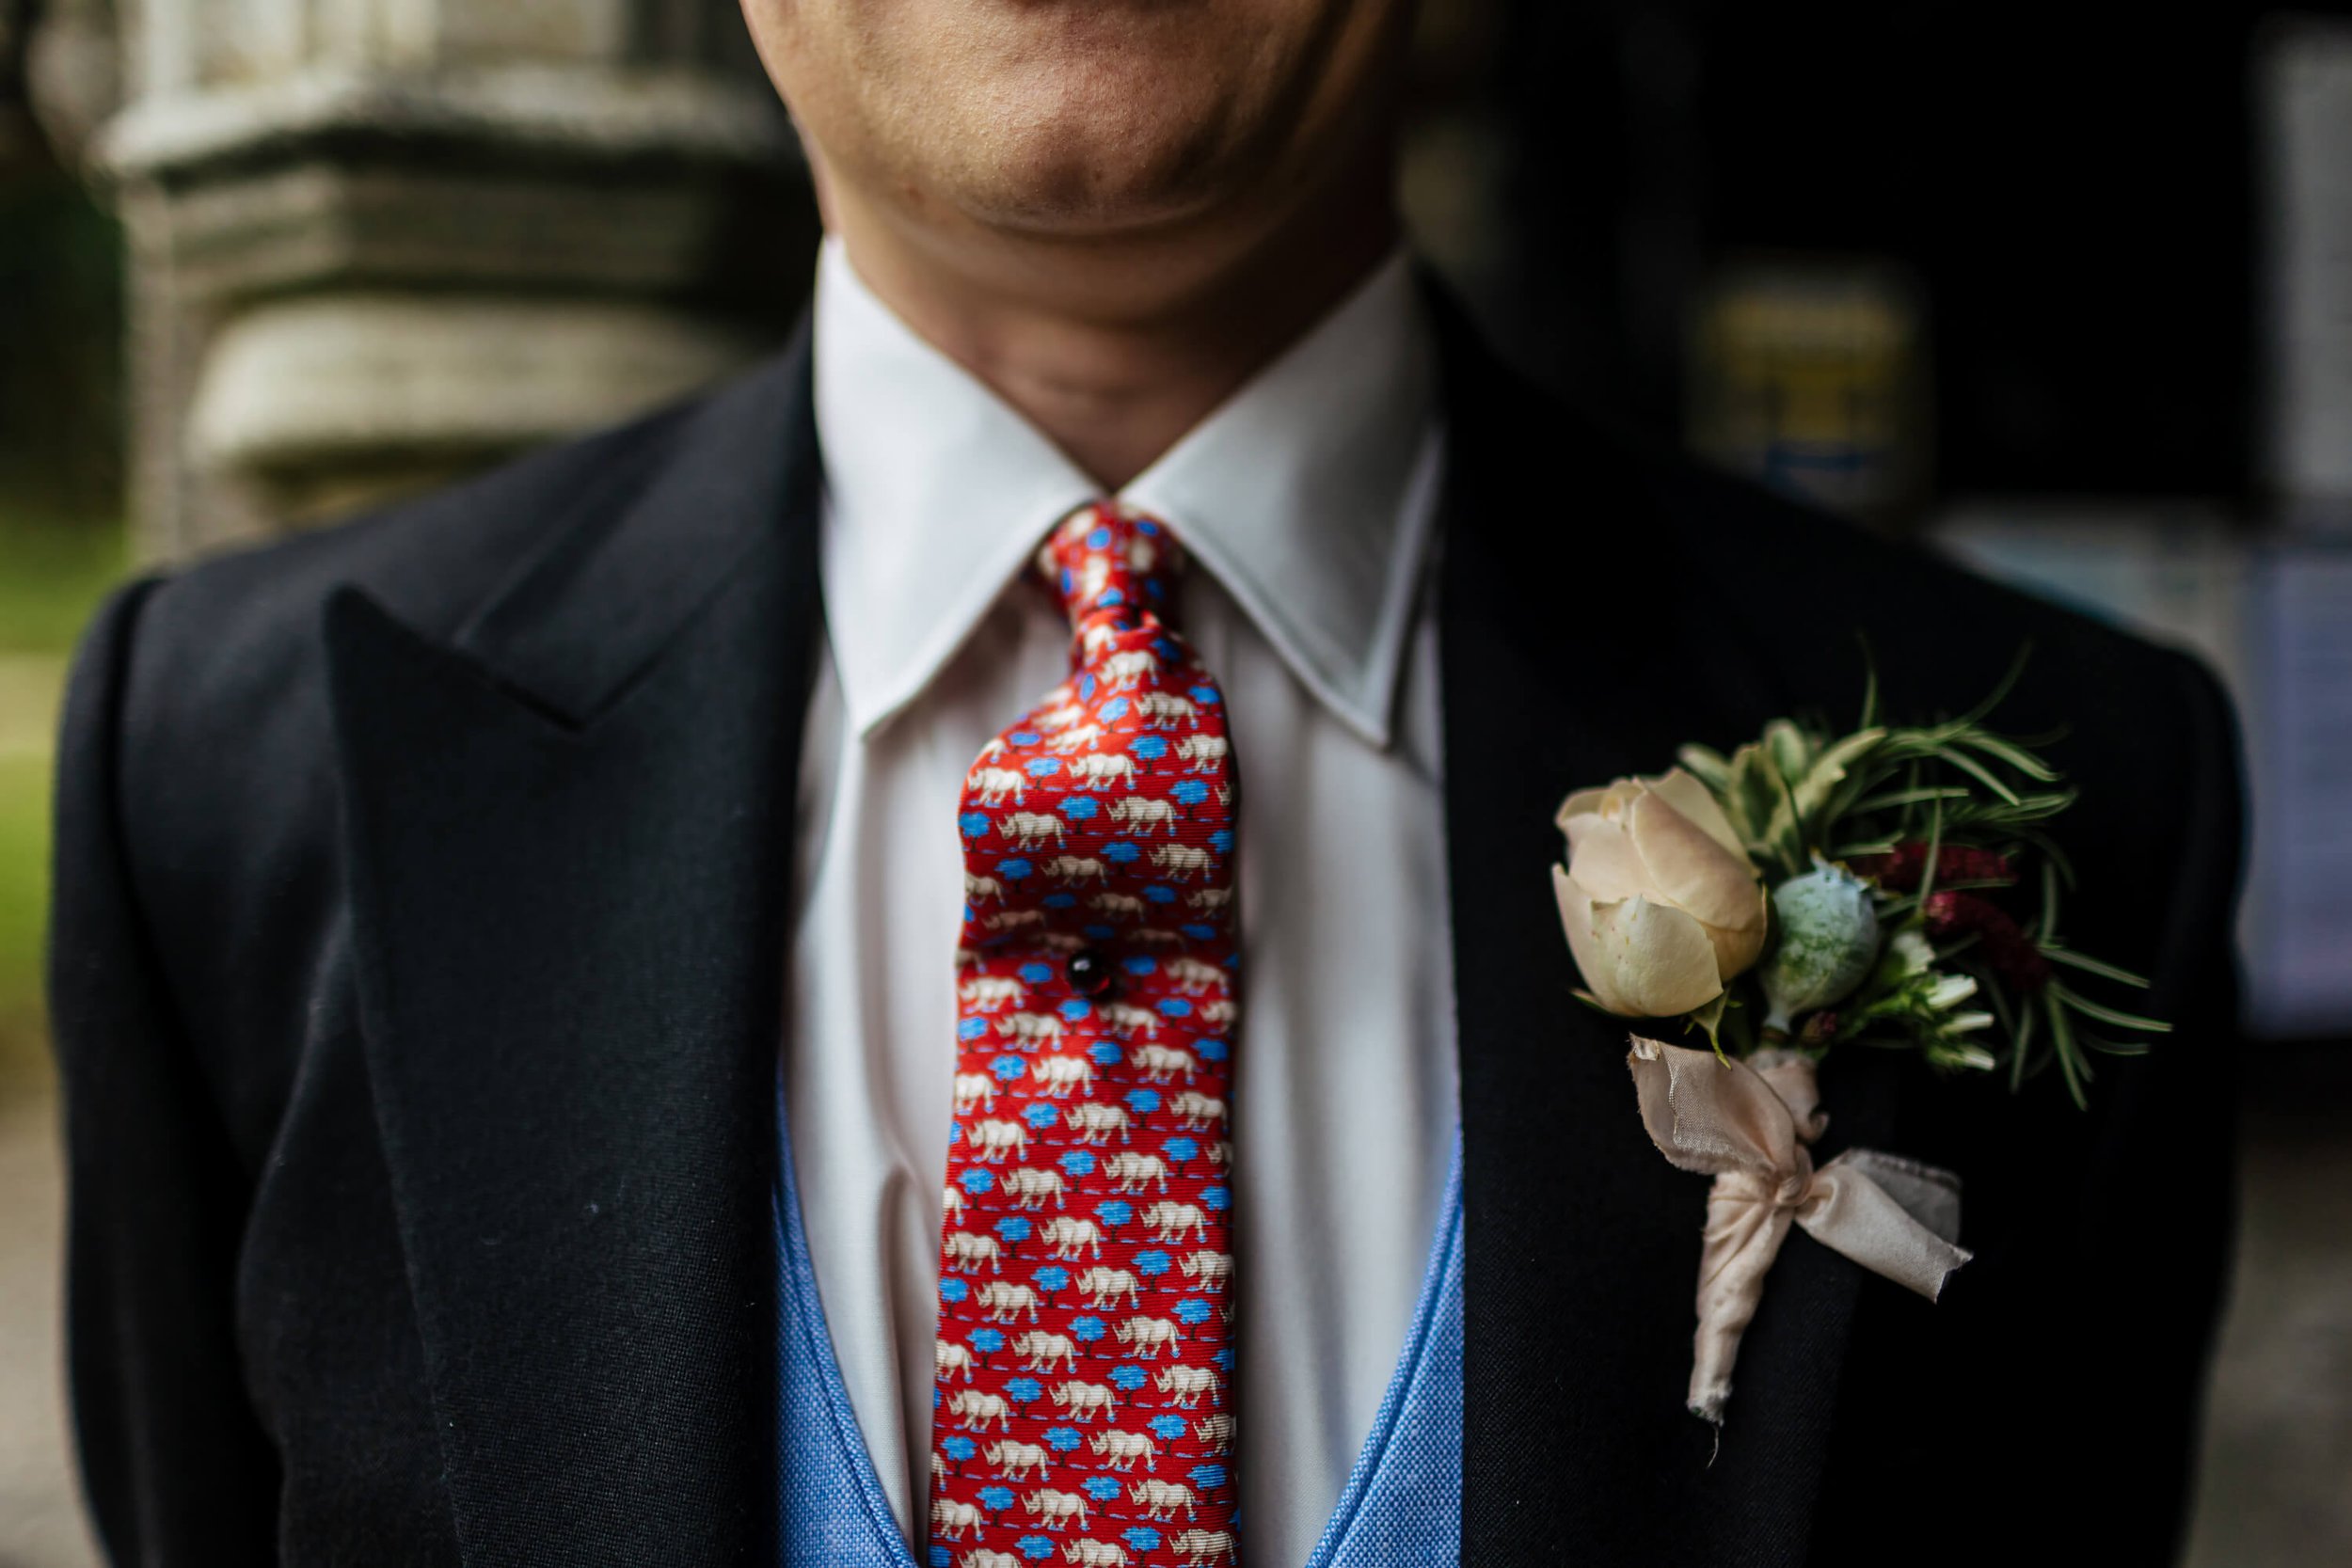 A close up of the groom's tie and buttonhole